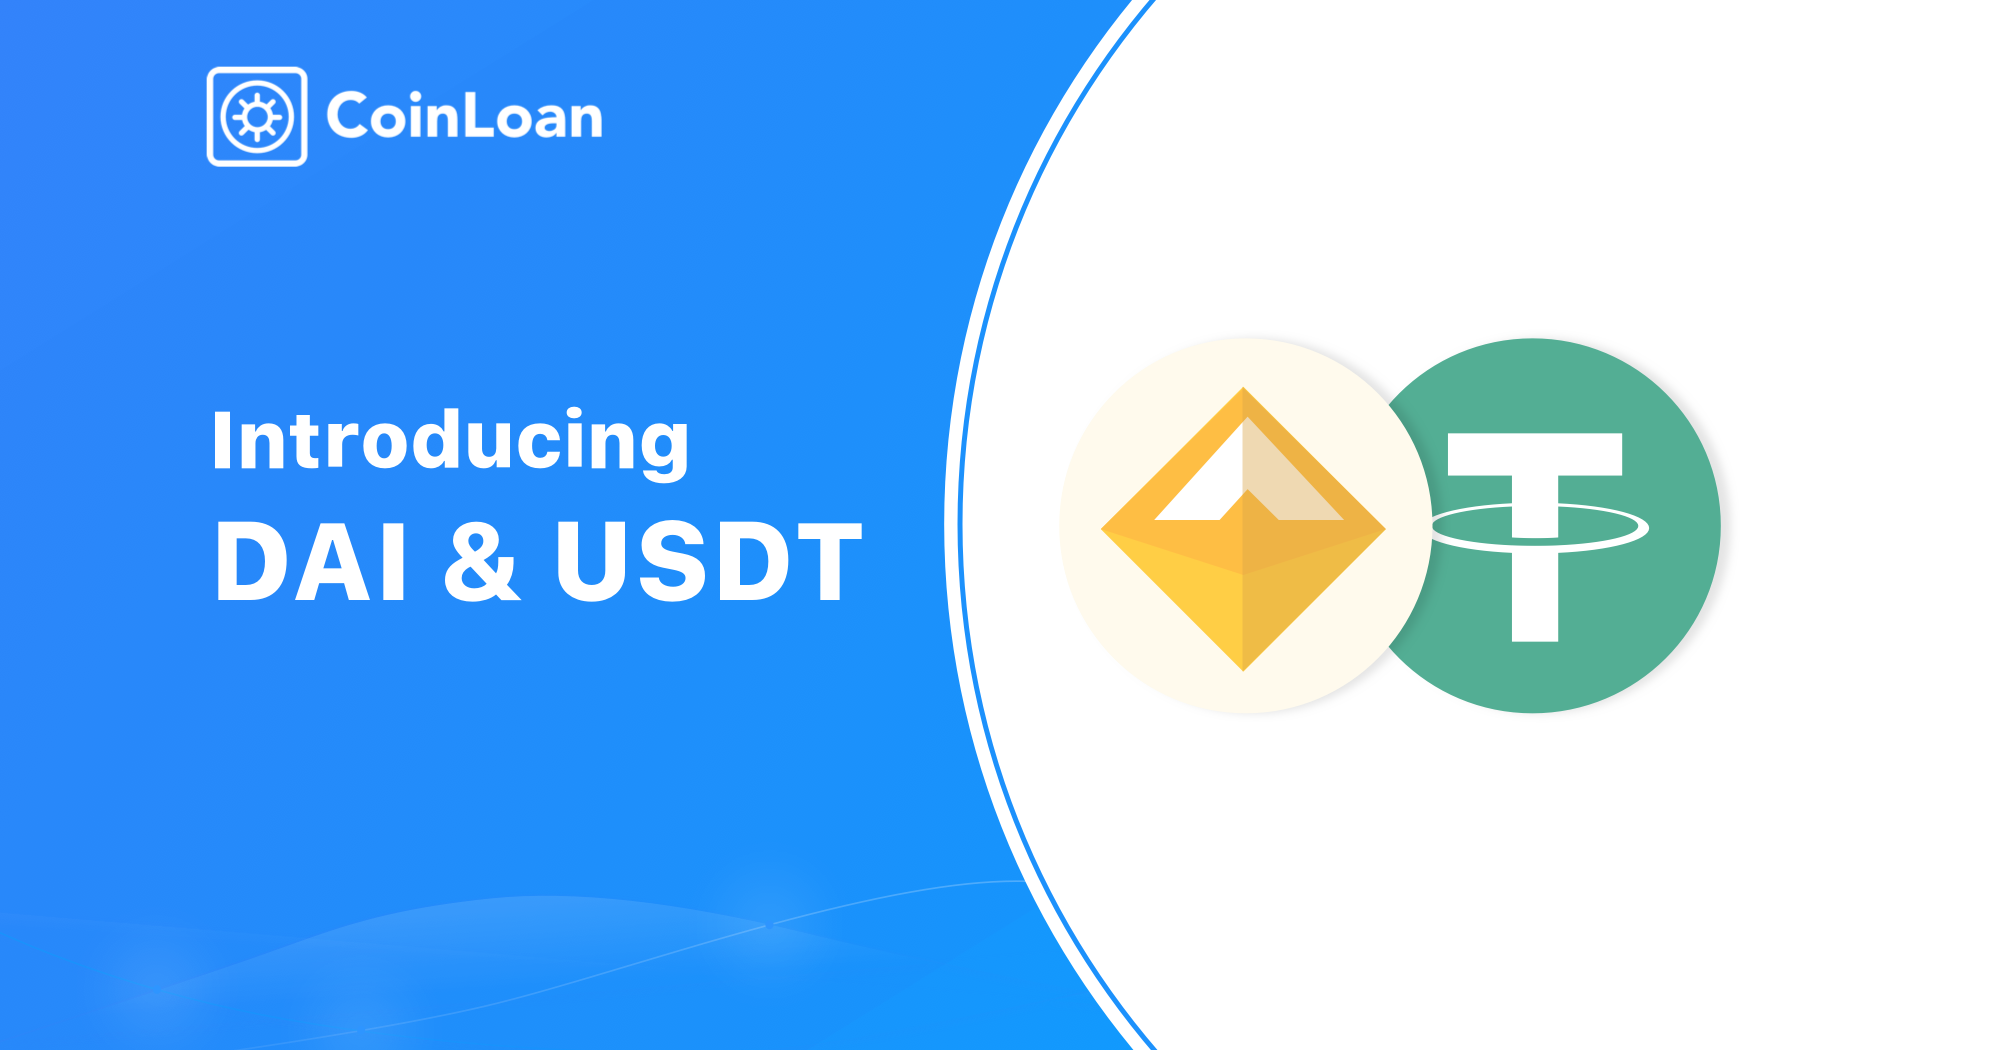 DAI and USDT Stablecoins Are Listed on CoinLoan